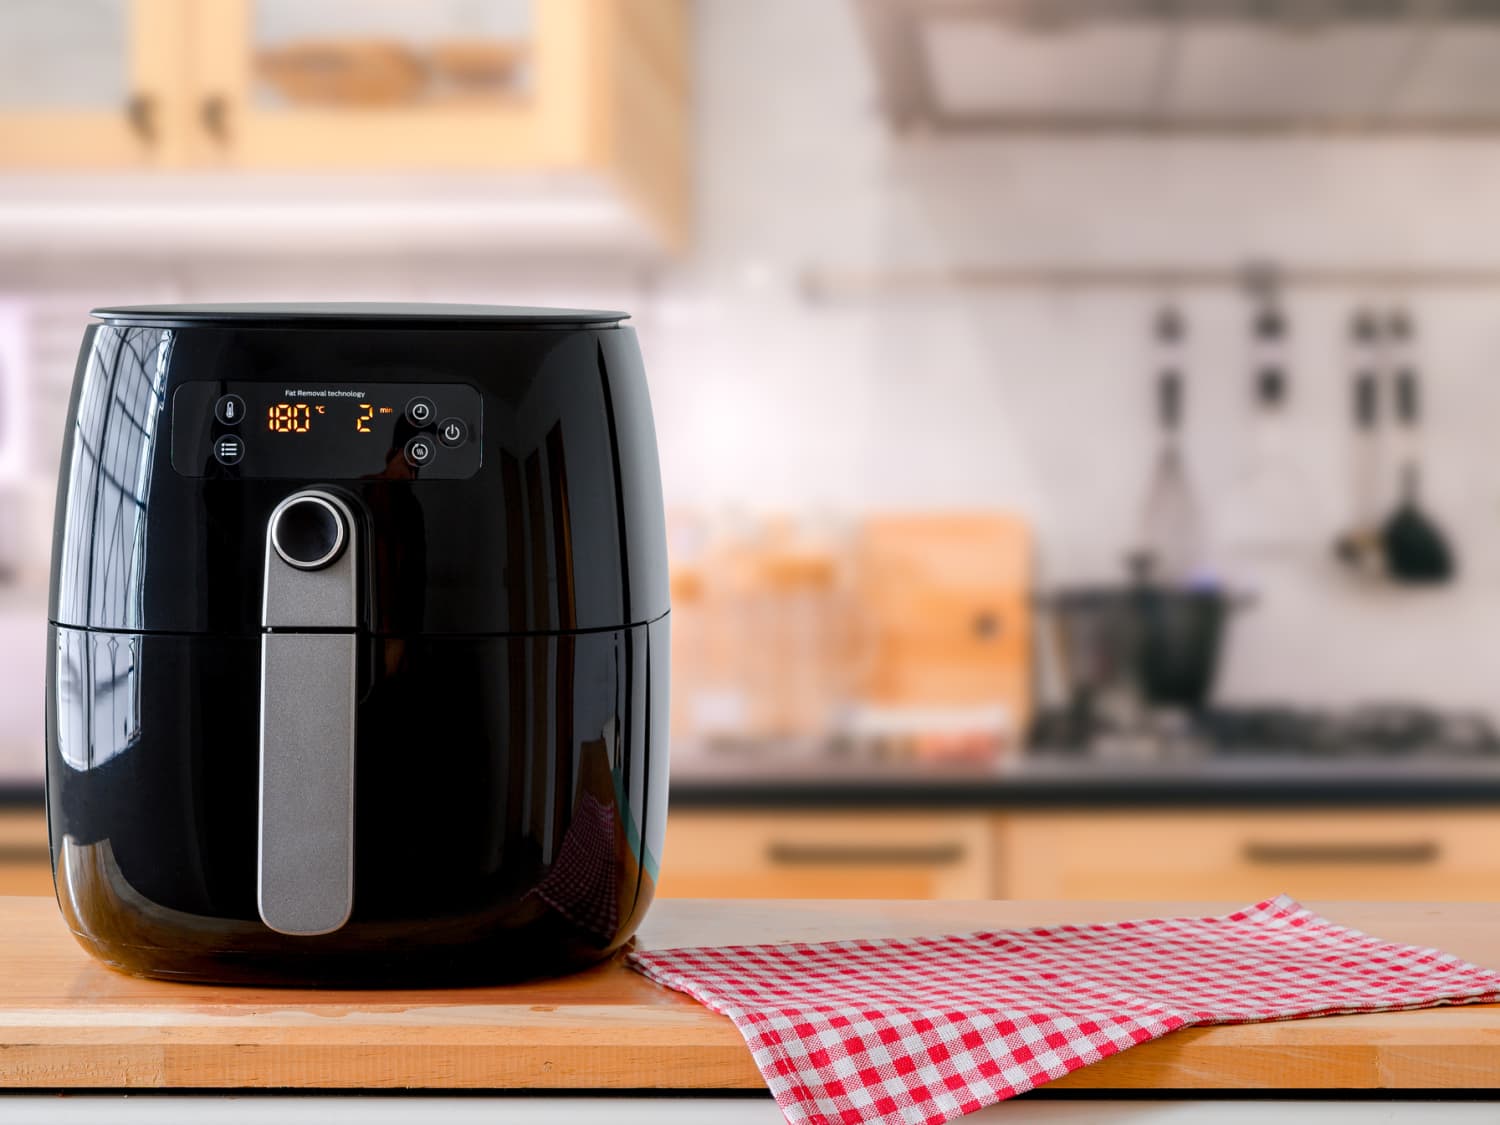 Toaster Oven Vs. Air Fryer: Why You Shouldn't Buy an Air Fryer in 2021